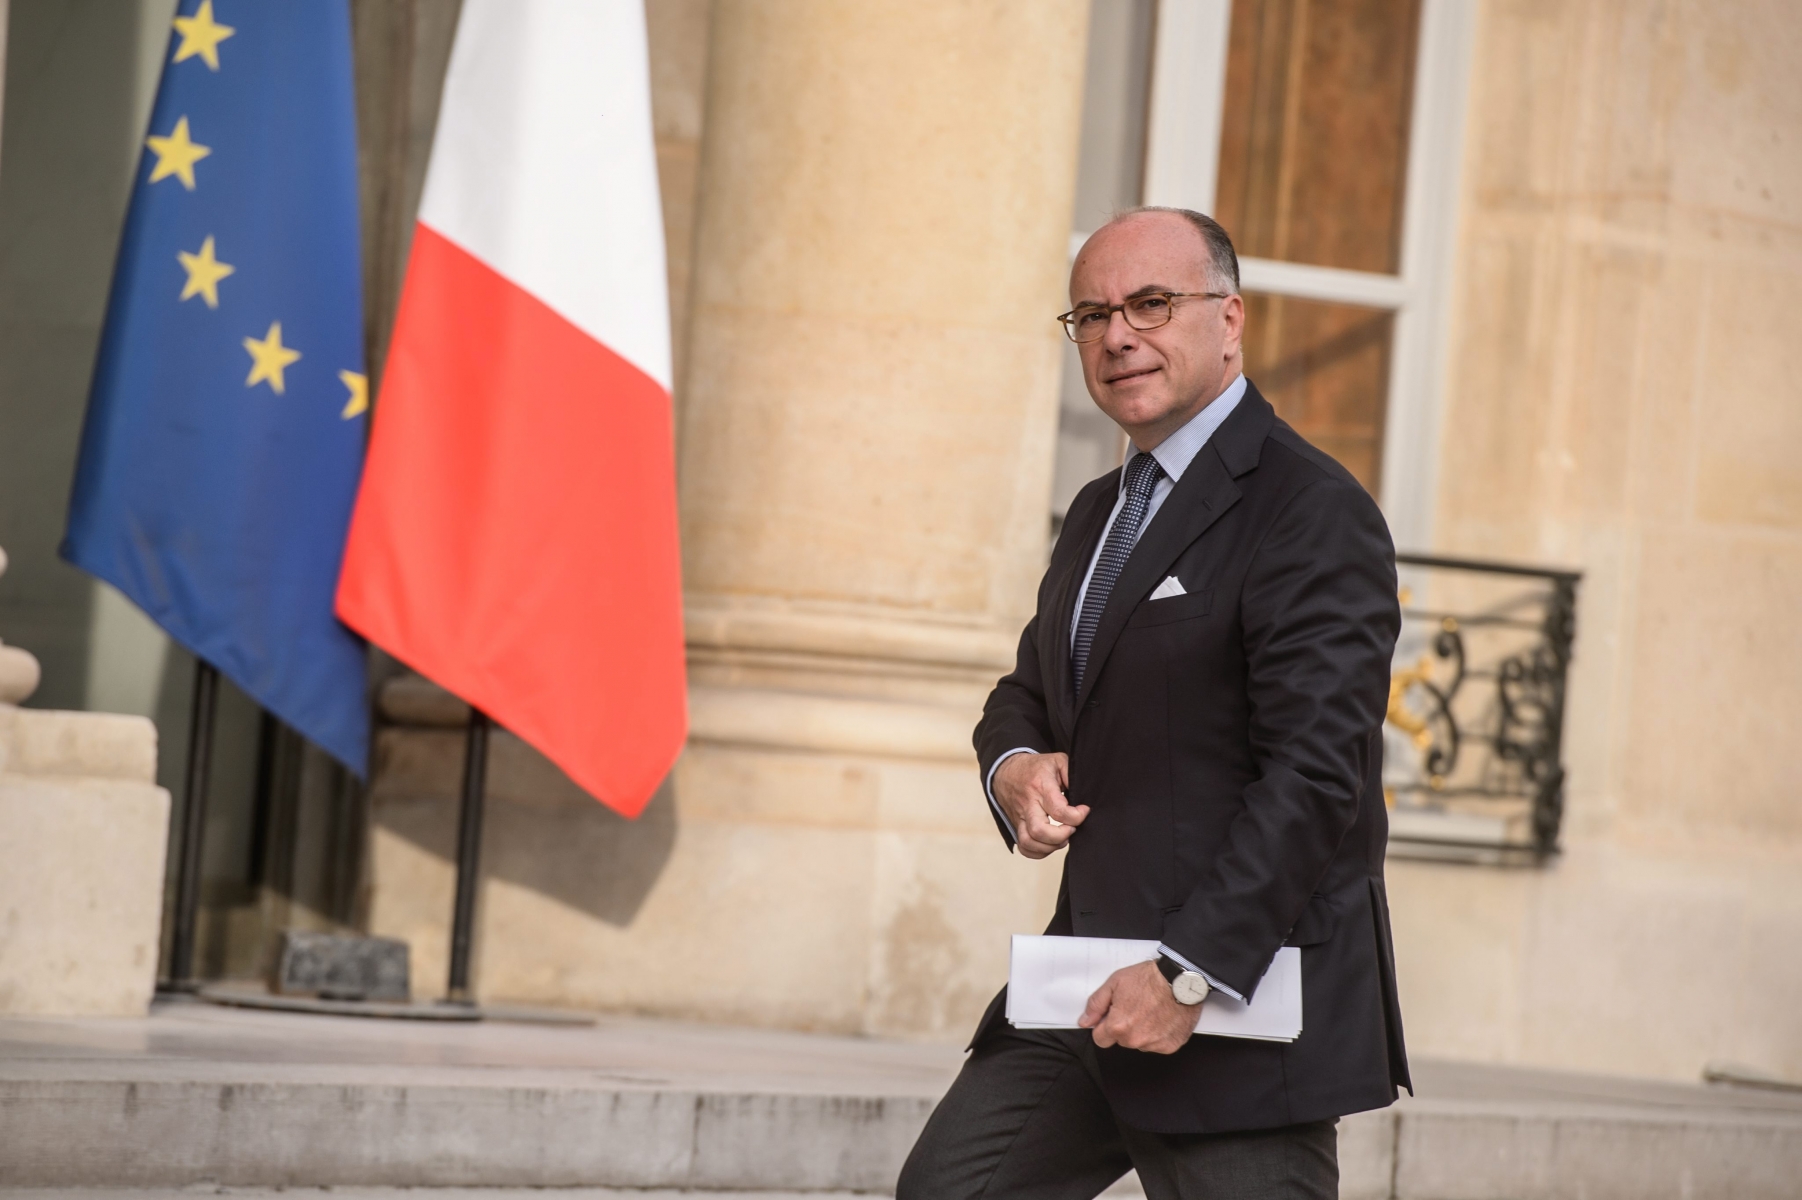 epa05661872 (FILE) A file picture dated 27 July 2016 shows French interior minister Bernard Cazeneuve arriving at Elysee Palace for a meeting with Francois Hollande and religious representatives, in Paris, France. Cazeneuve was named the new Prime Minister on 06 December 2016, after Manuel Valls announced his resignation as Prime Minister to run in the Socialist Party's primaries for French presidential elections on 23 April and 07 May 2017.  EPA/CHRISTOPHE PETIT TESSON FILE FRANCE CRIME CHURCH ATTACK AFTERMATH